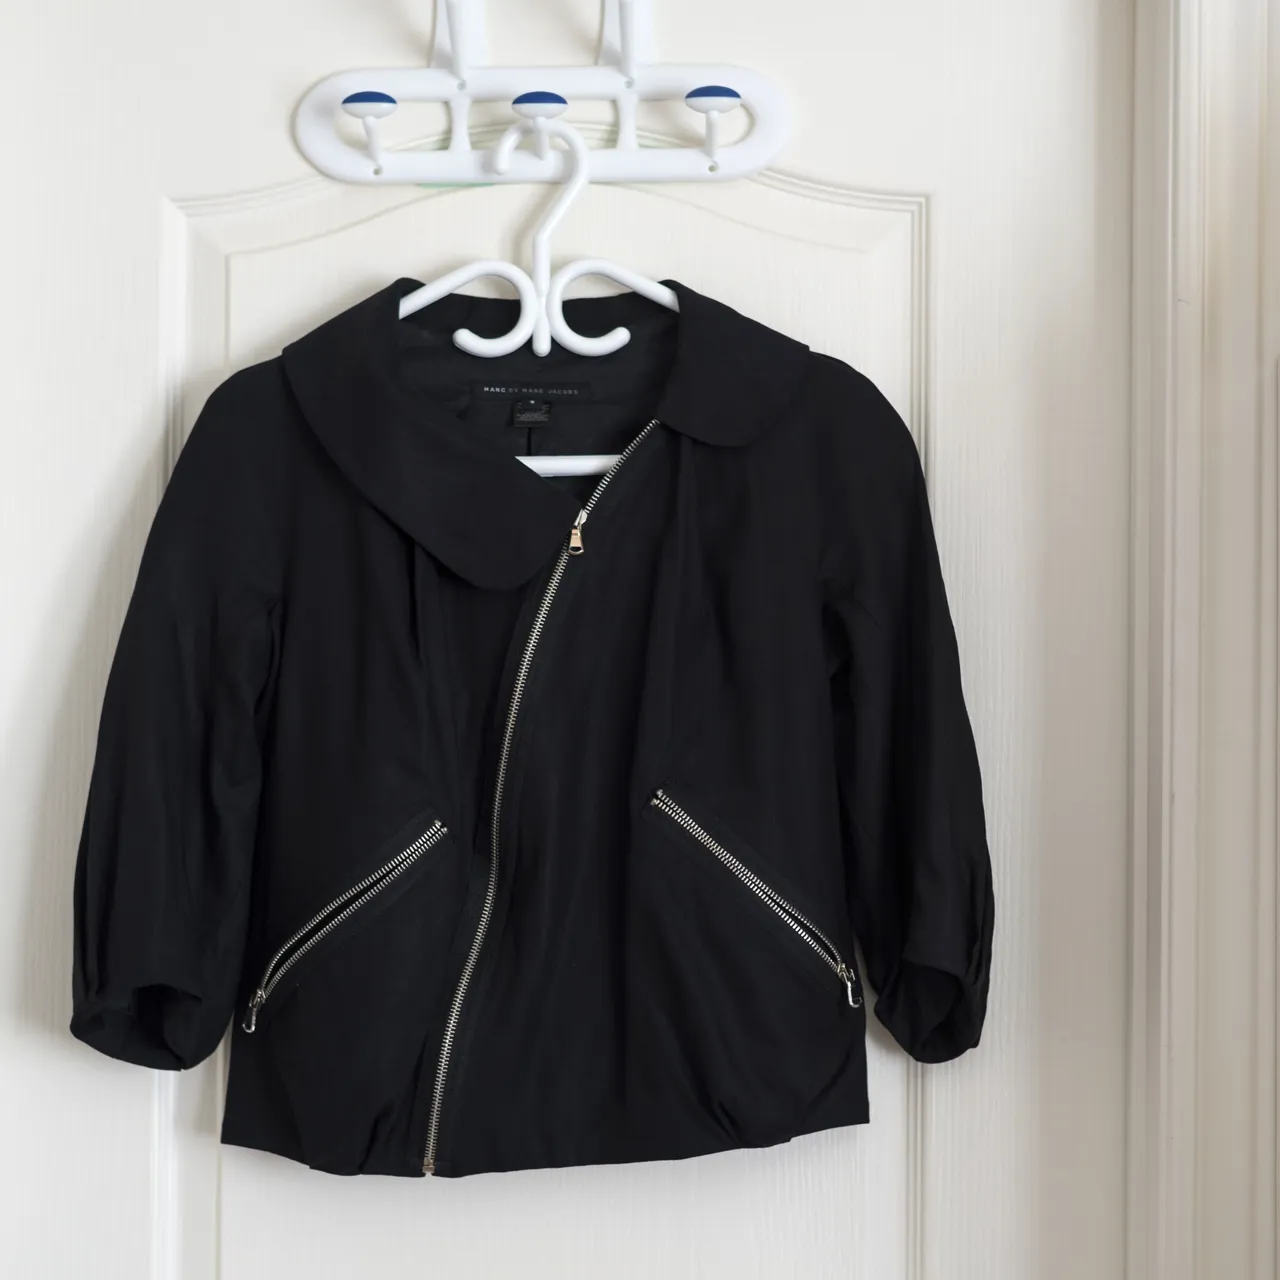 Marc by Marc Jacobs Cropped Black Jacket photo 3